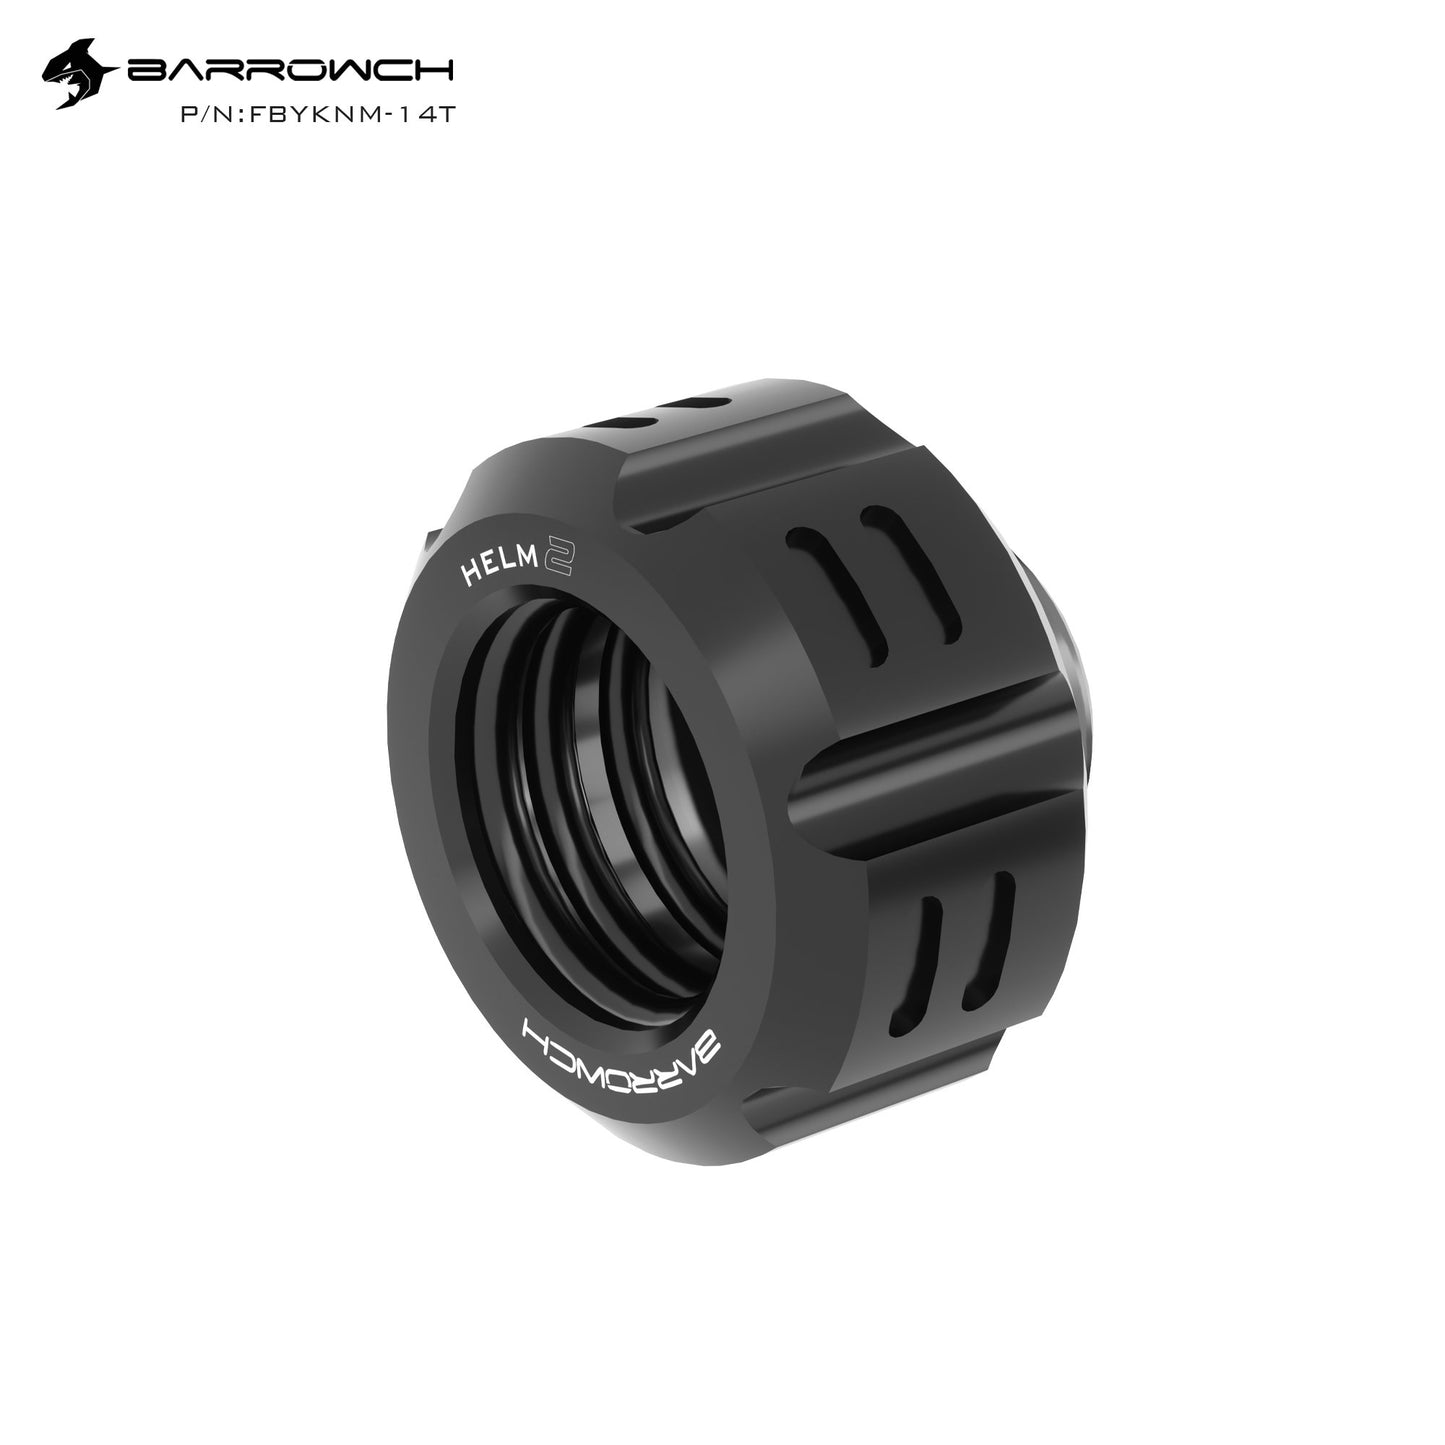 Barrowch Hard Fitting, Helm 2 Series For OD 14mm, Adapter For Water Cooling System, 1 set/6pcs, FBYKNM-14T